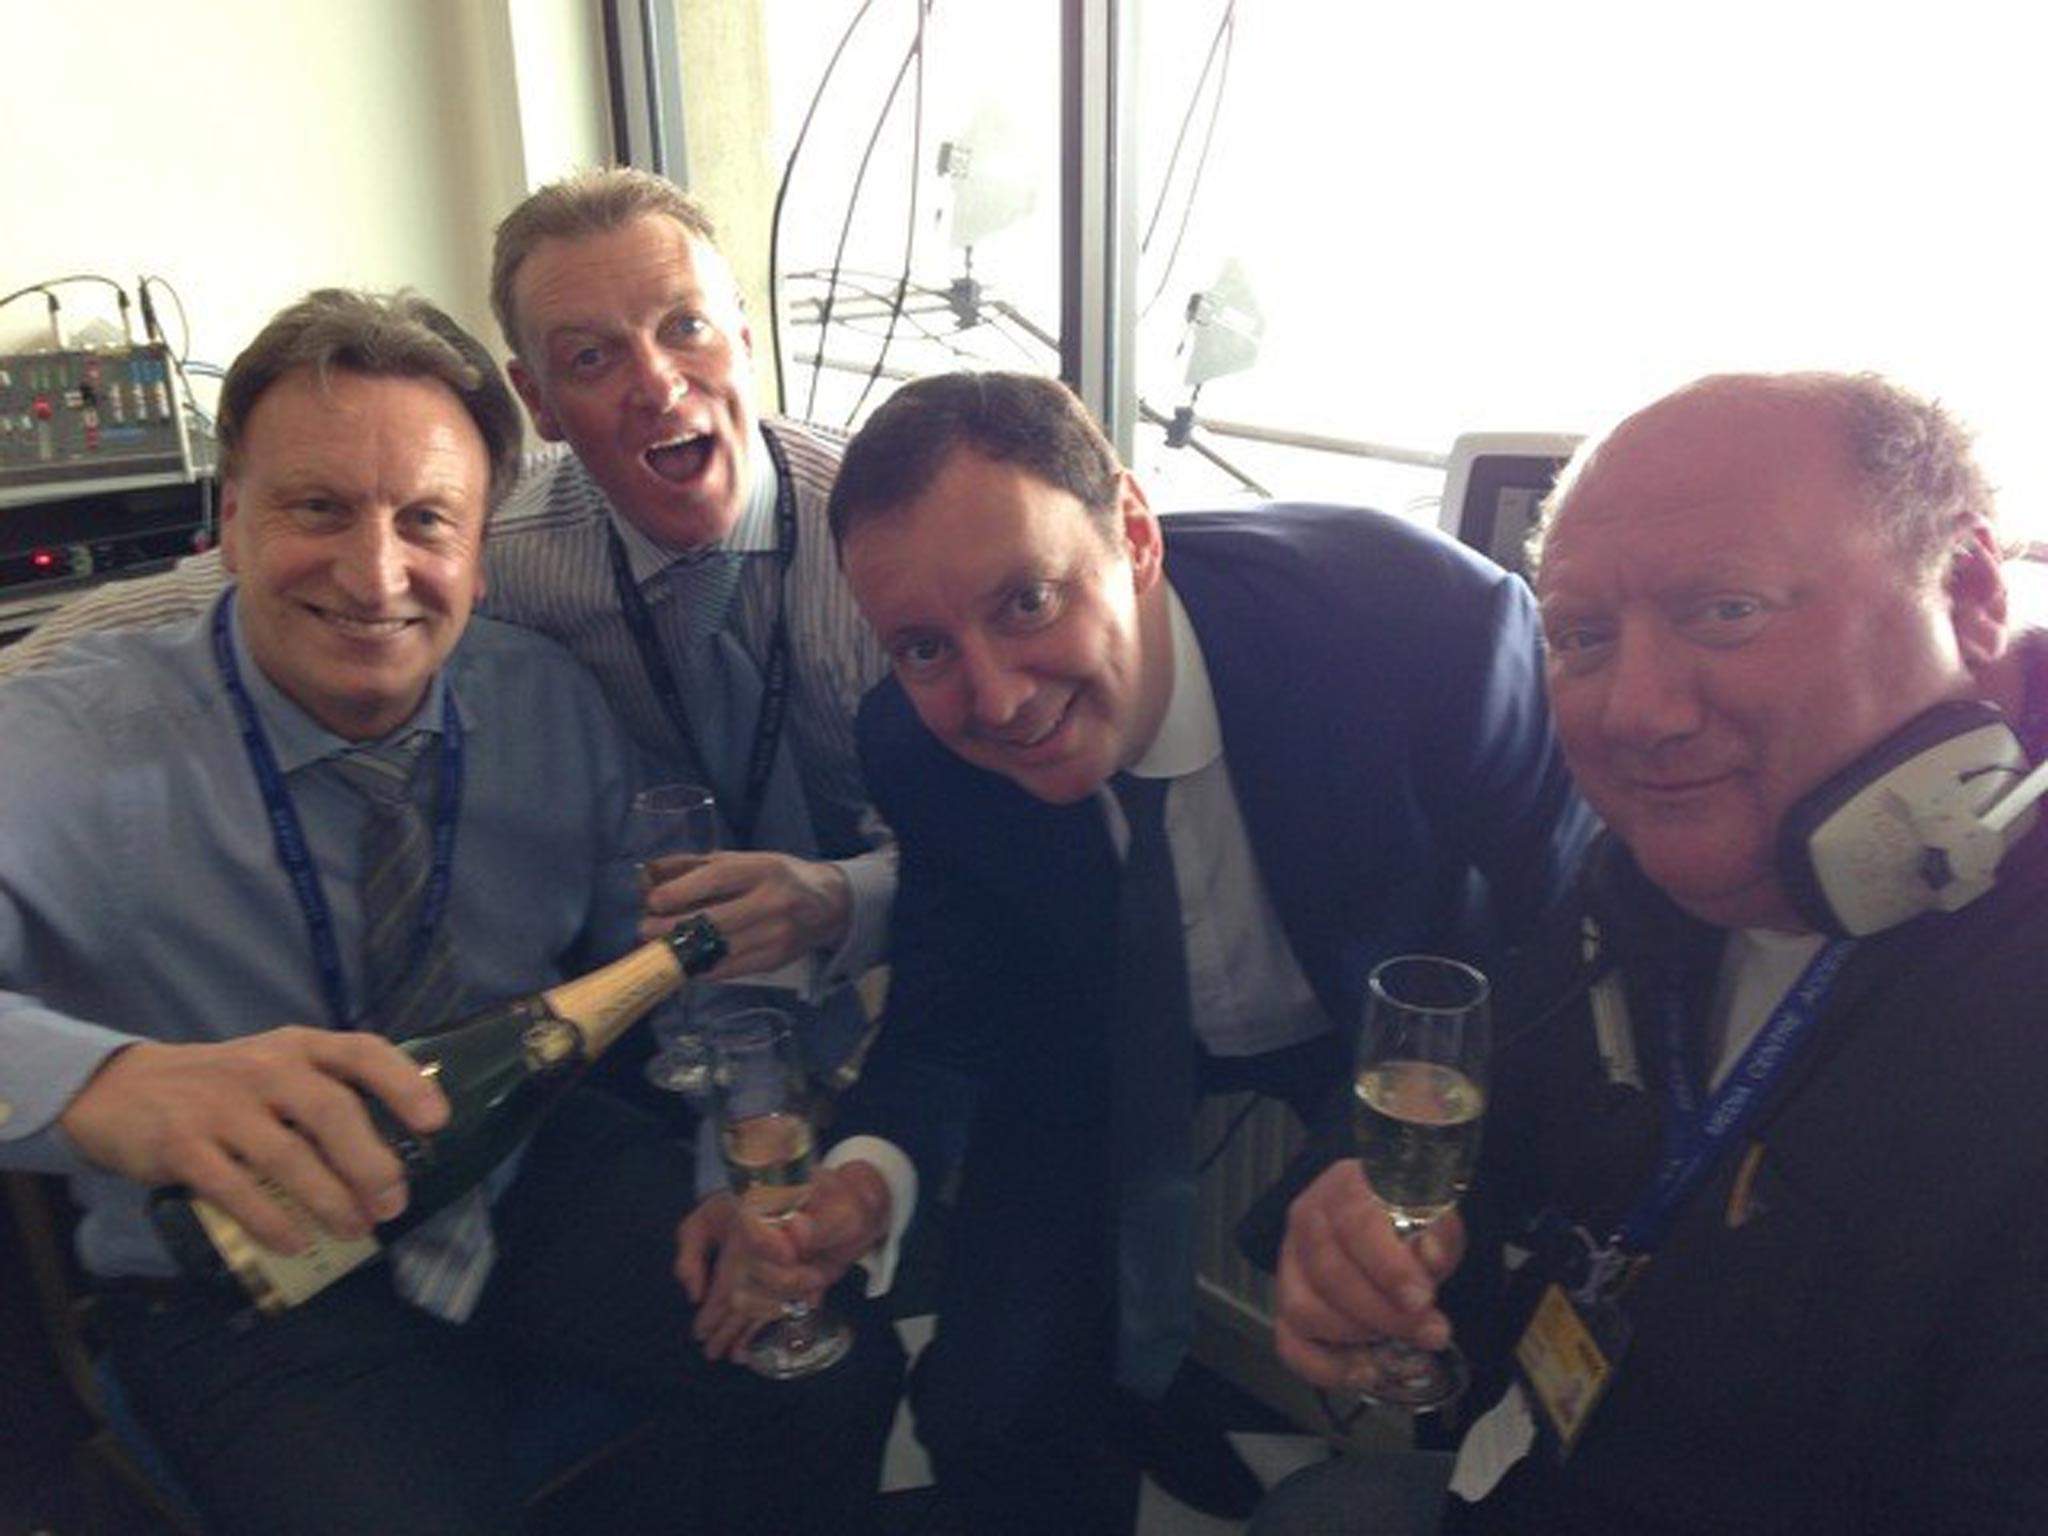 Neil Warnock pour the bubbly, while Simon Clare and David Stevens of Coral and Alan Brazil lift their glasses